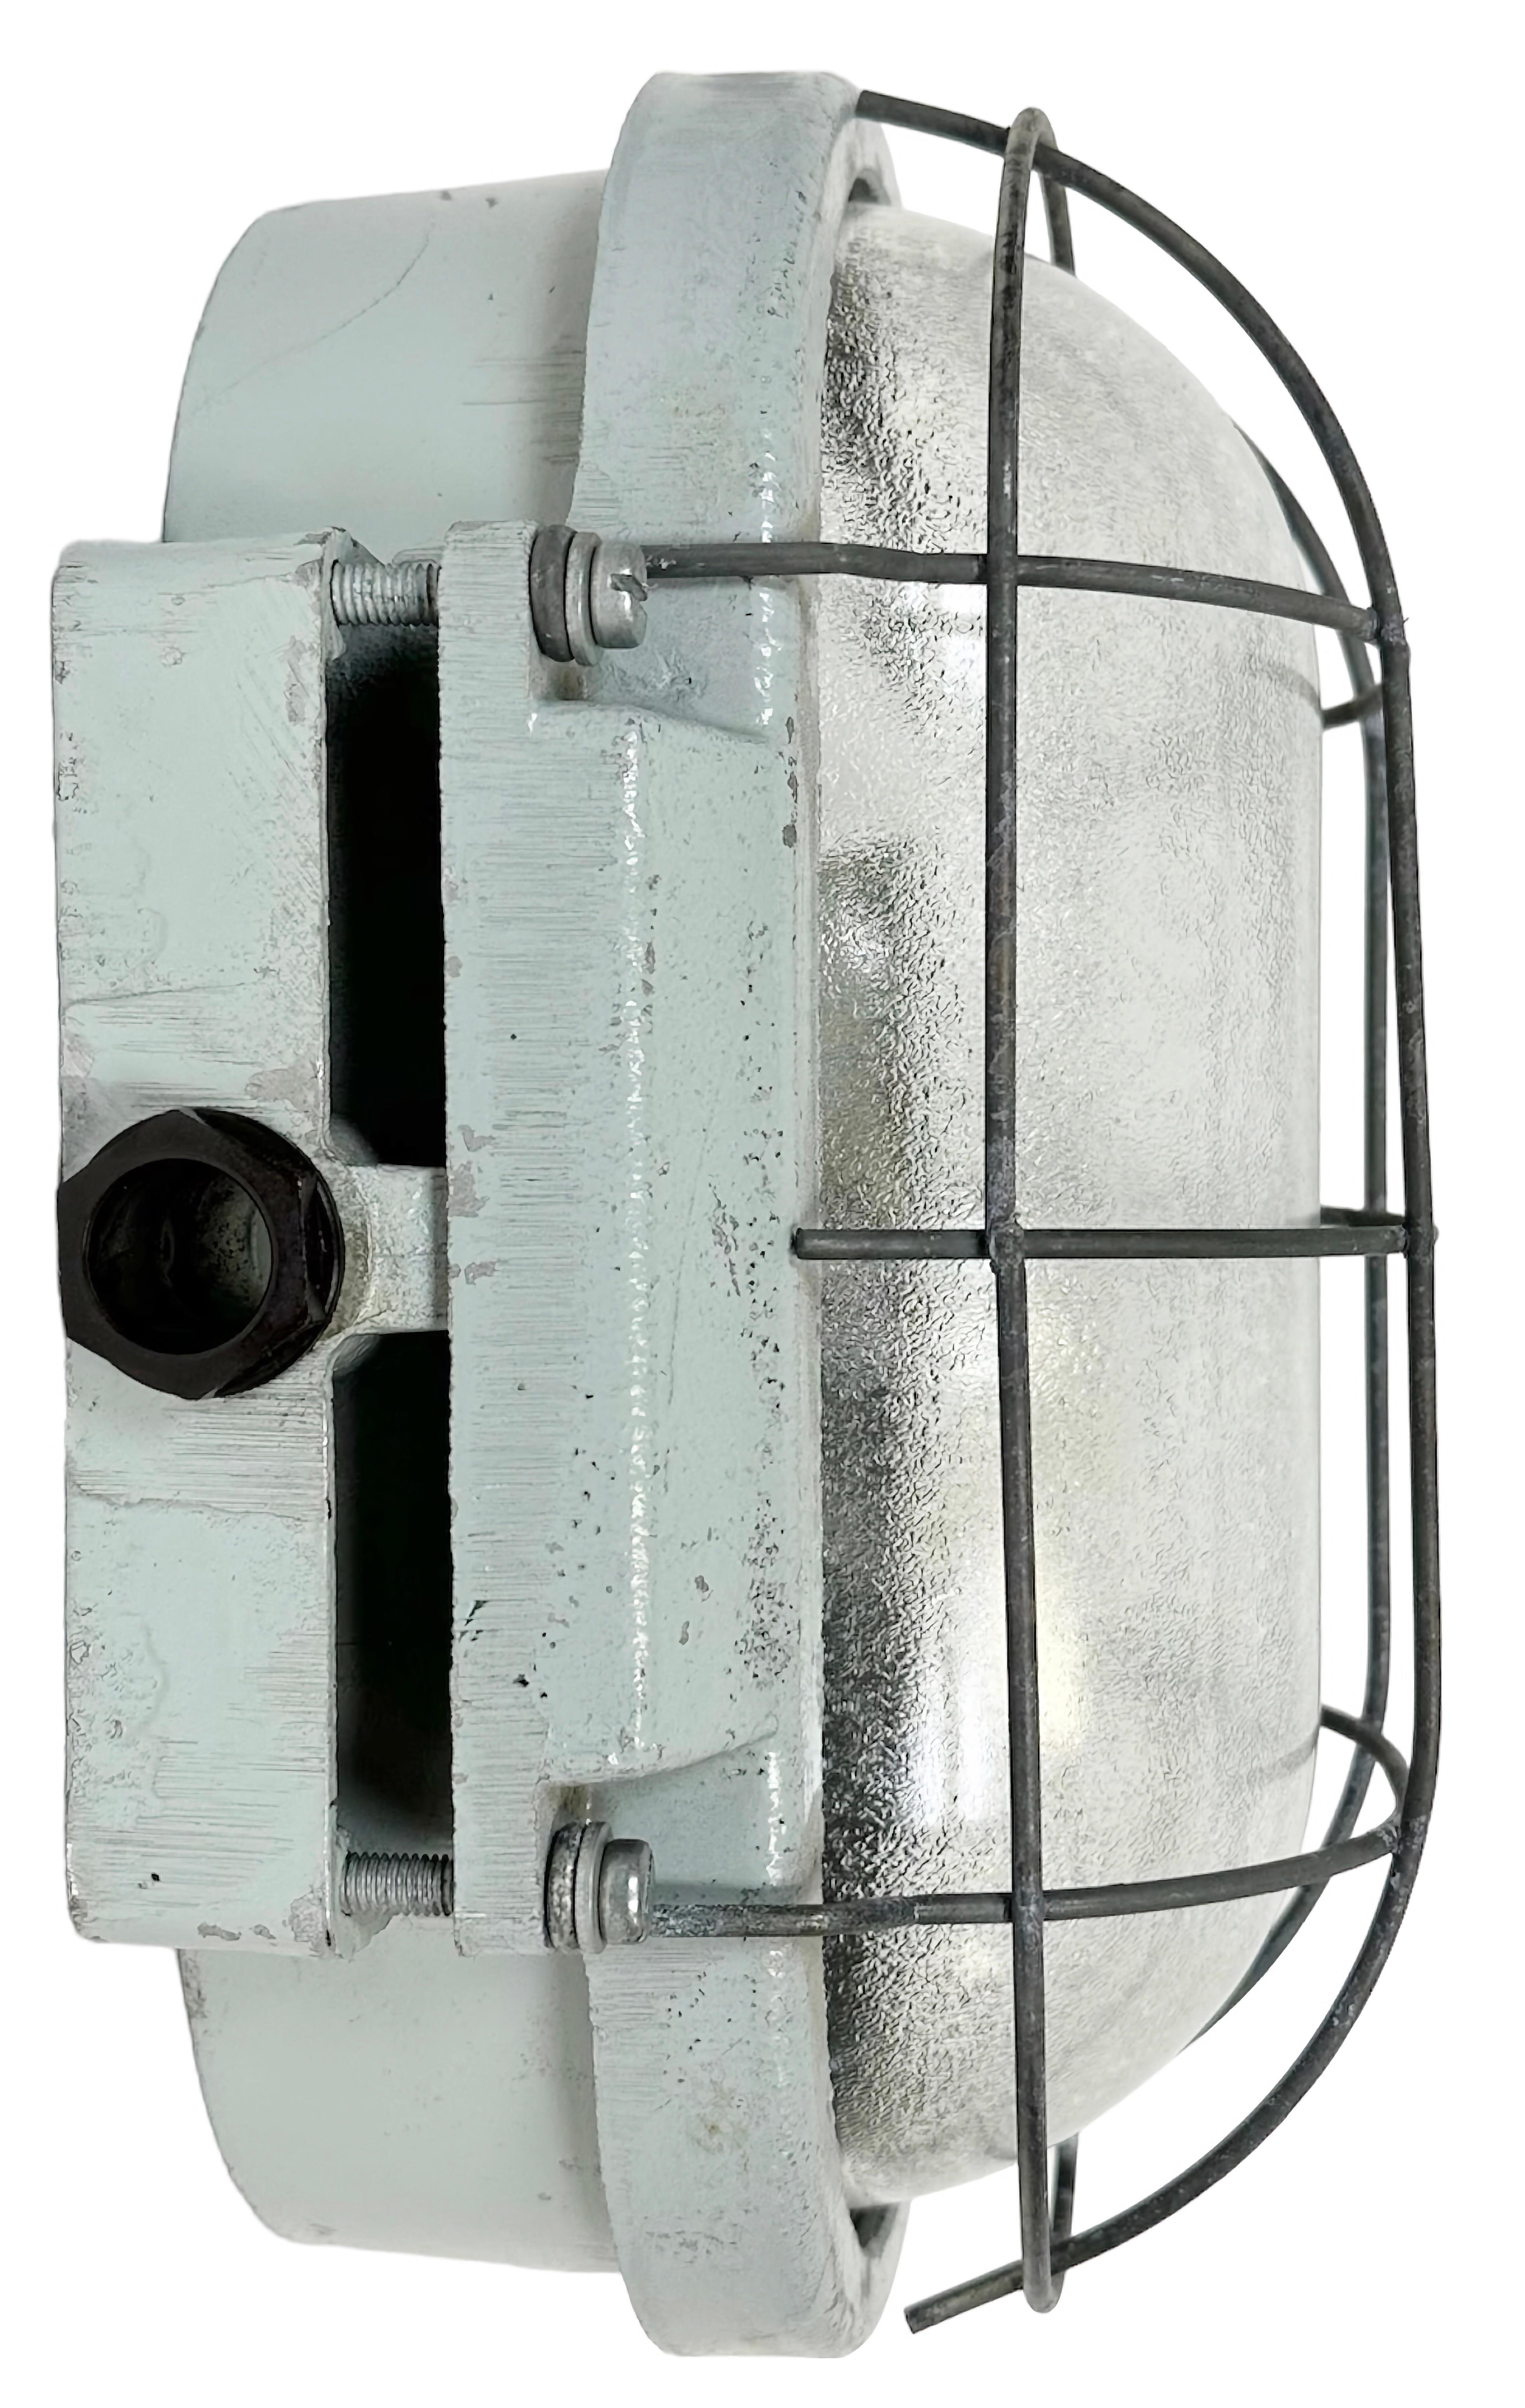 Czech Industrial Cast Aluminium Wall Light with Frosted Glass from Elektrosvit, 1970s For Sale